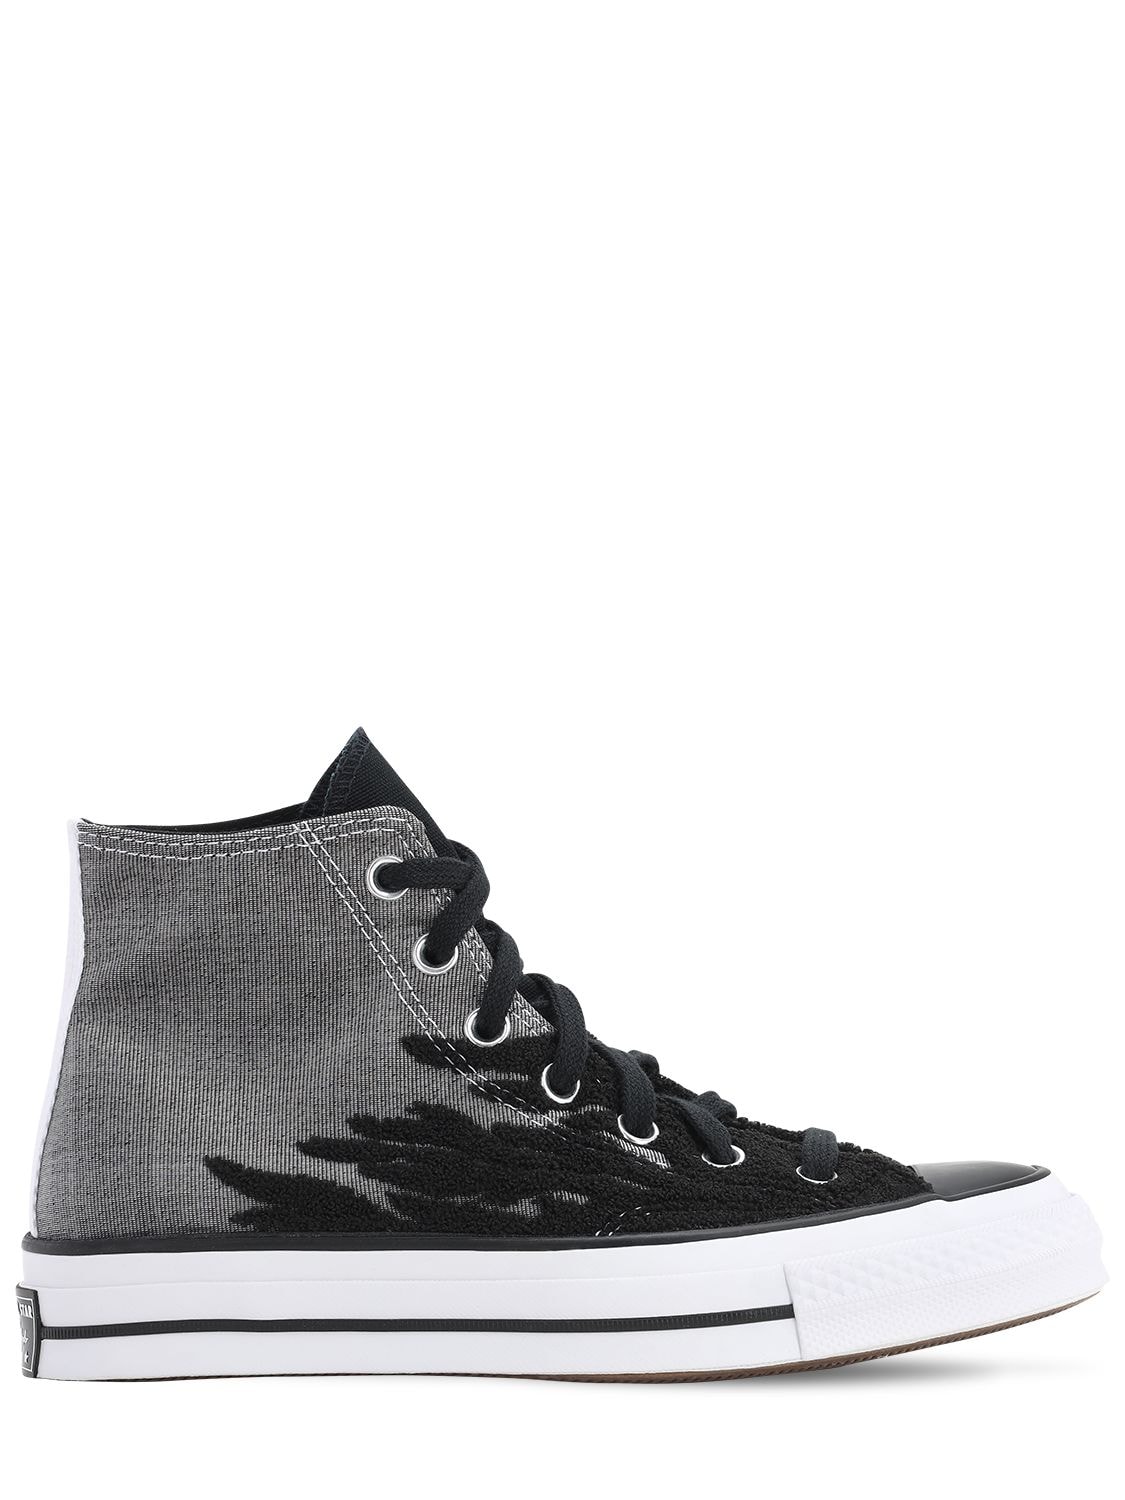 Converse Archive Prints Elevated Chuck 